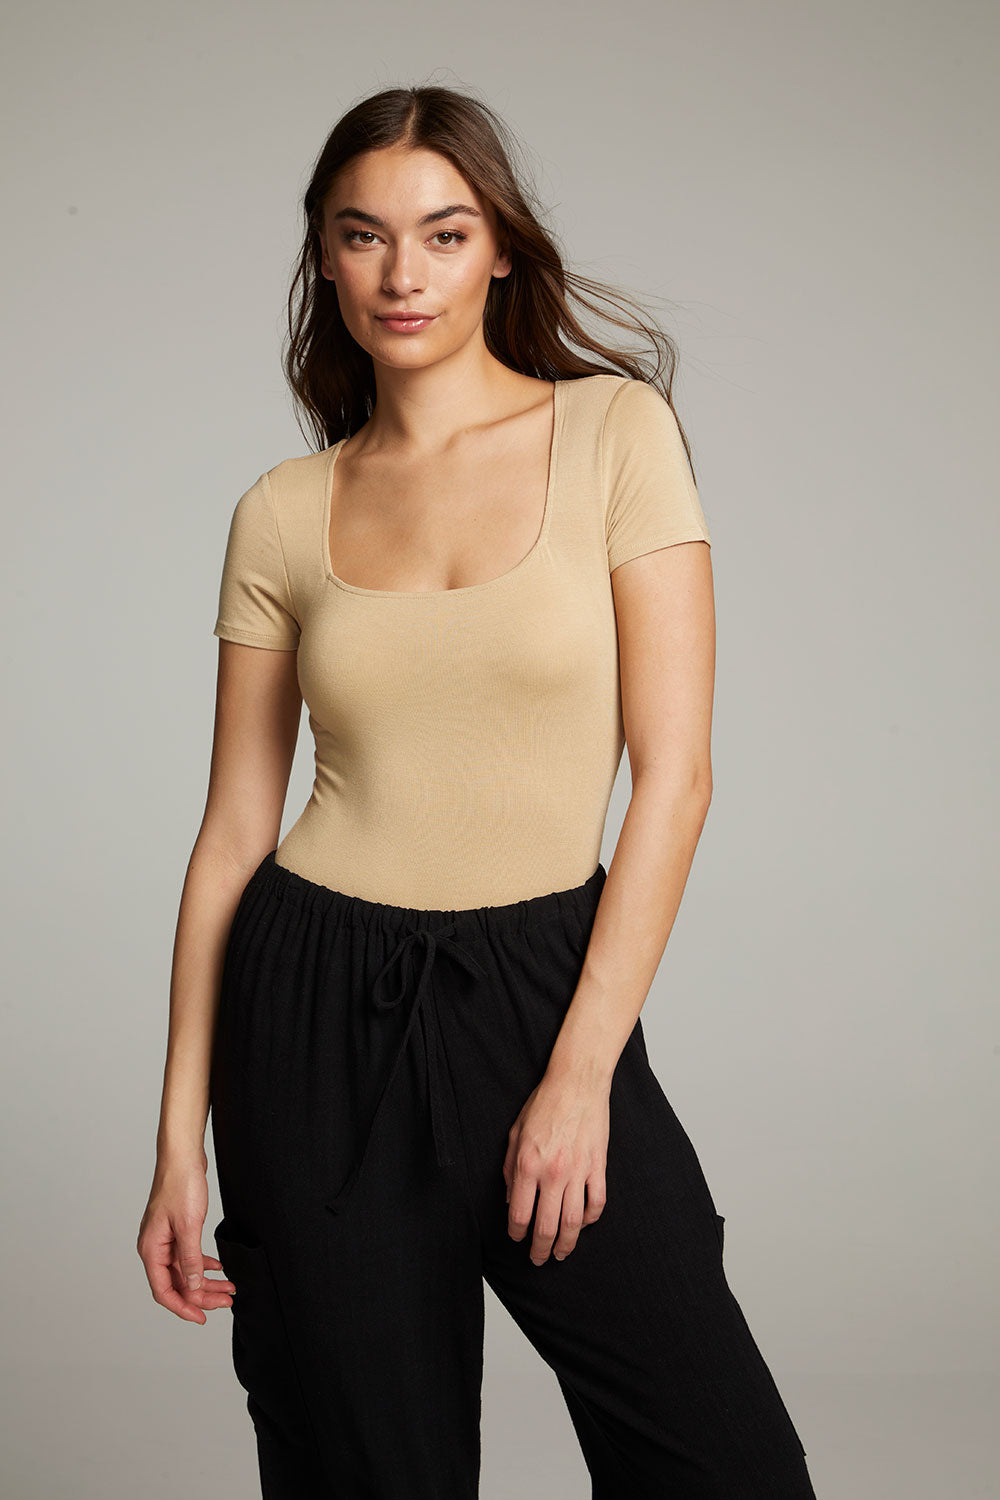 River Cappuccino Bodysuit WOMENS chaserbrand